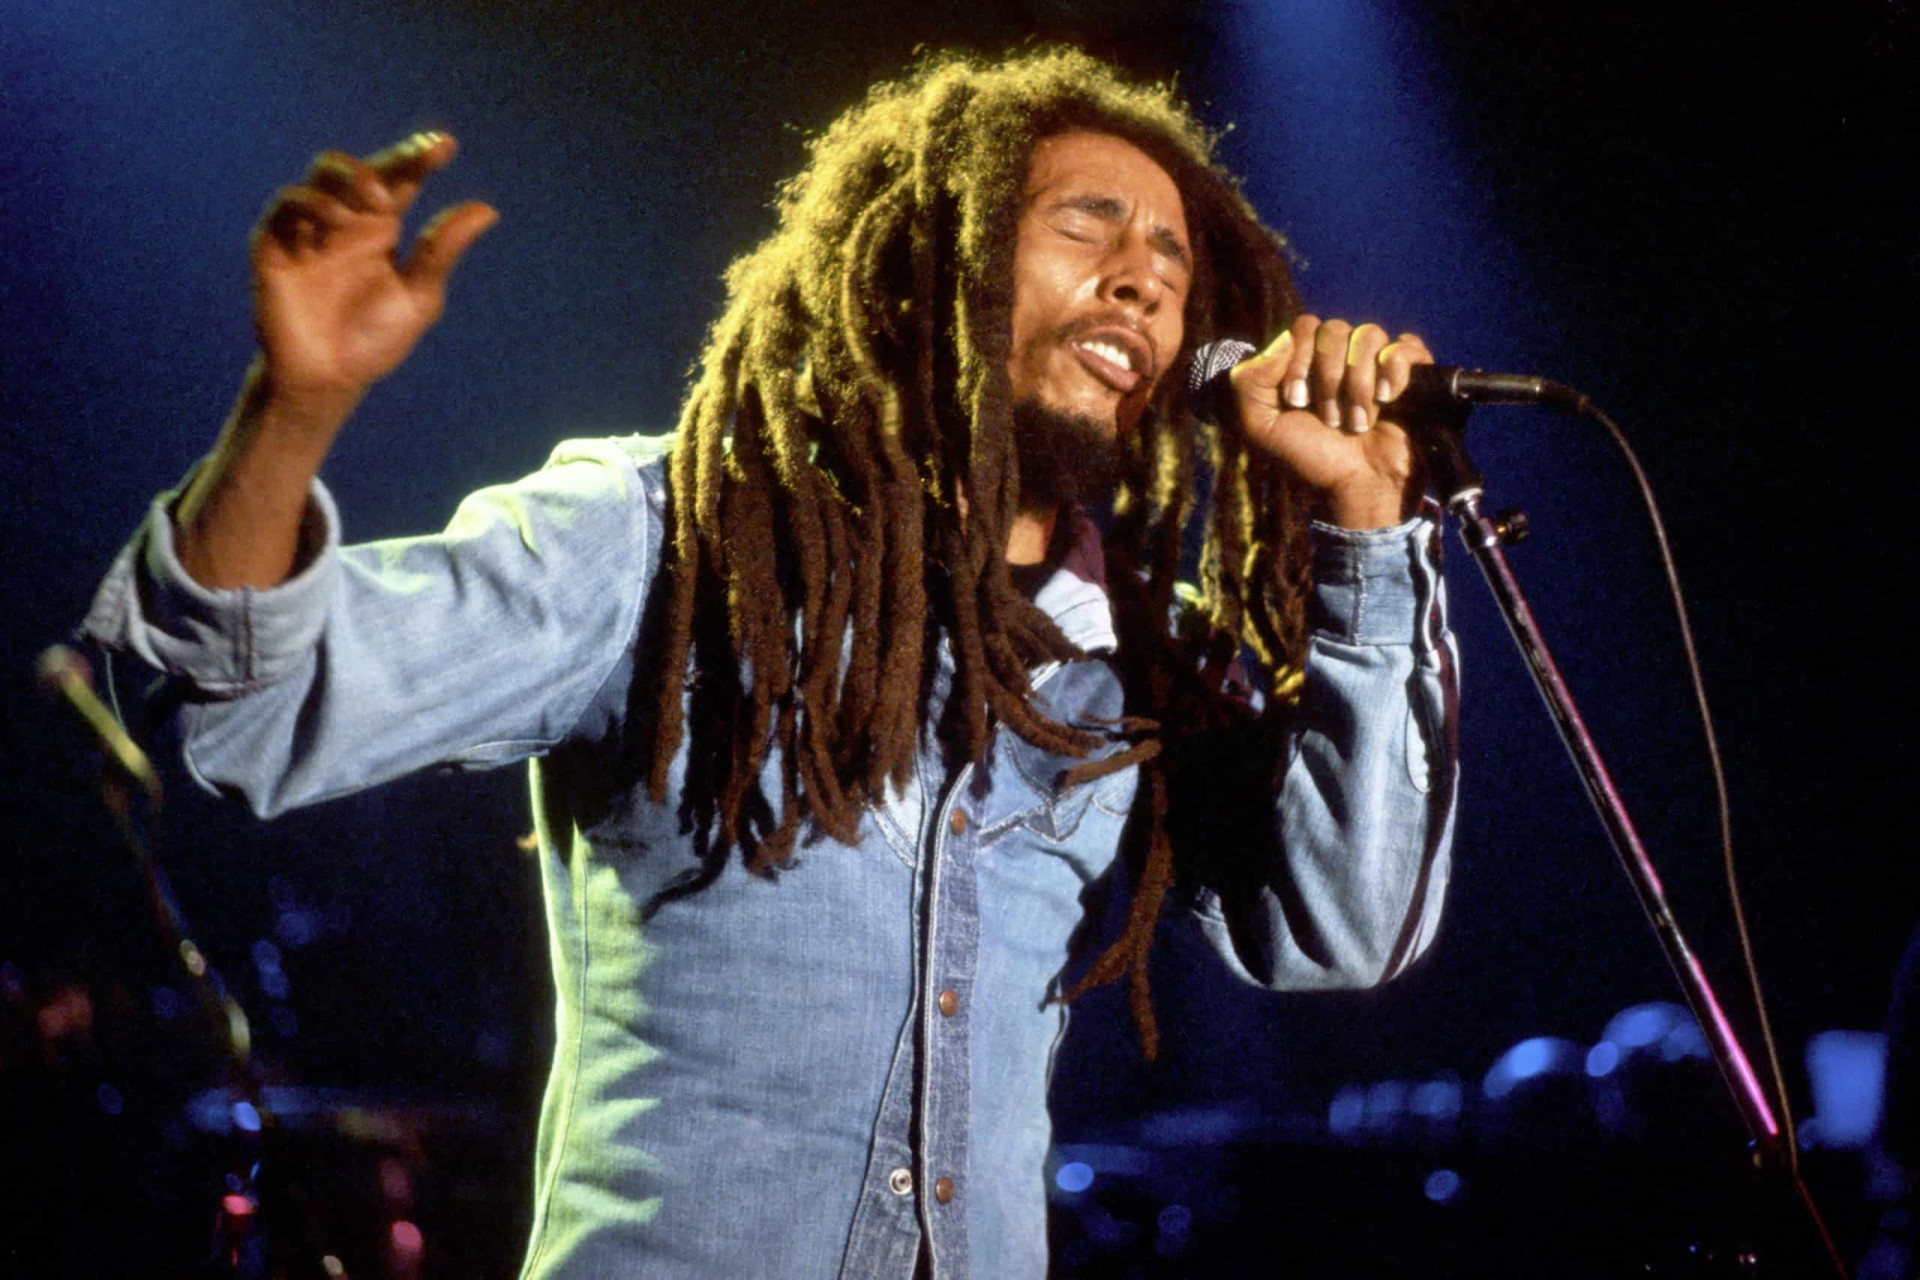 <p><a href="https://www.starsinsider.com/music/503773/the-many-musical-styles-of-the-caribbean" rel="noopener">Bob Marley</a> co-wrote 'Buffalo Soldier' with King Sporty in 1978, but the song made its first appearance on the 1983 album 'Confrontation,' released posthumously two years after Marley's death. The Buffalo Soldiers incidentally were African Americans who served in the US military during the Civil War and in later conflicts.</p><p><a href="https://www.msn.com/en-my/community/channel/vid-7xx8mnucu55yw63we9va2gwr7uihbxwc68fxqp25x6tg4ftibpra?cvid=94631541bc0f4f89bfd59158d696ad7e">Follow us and access great exclusive content every day</a></p>